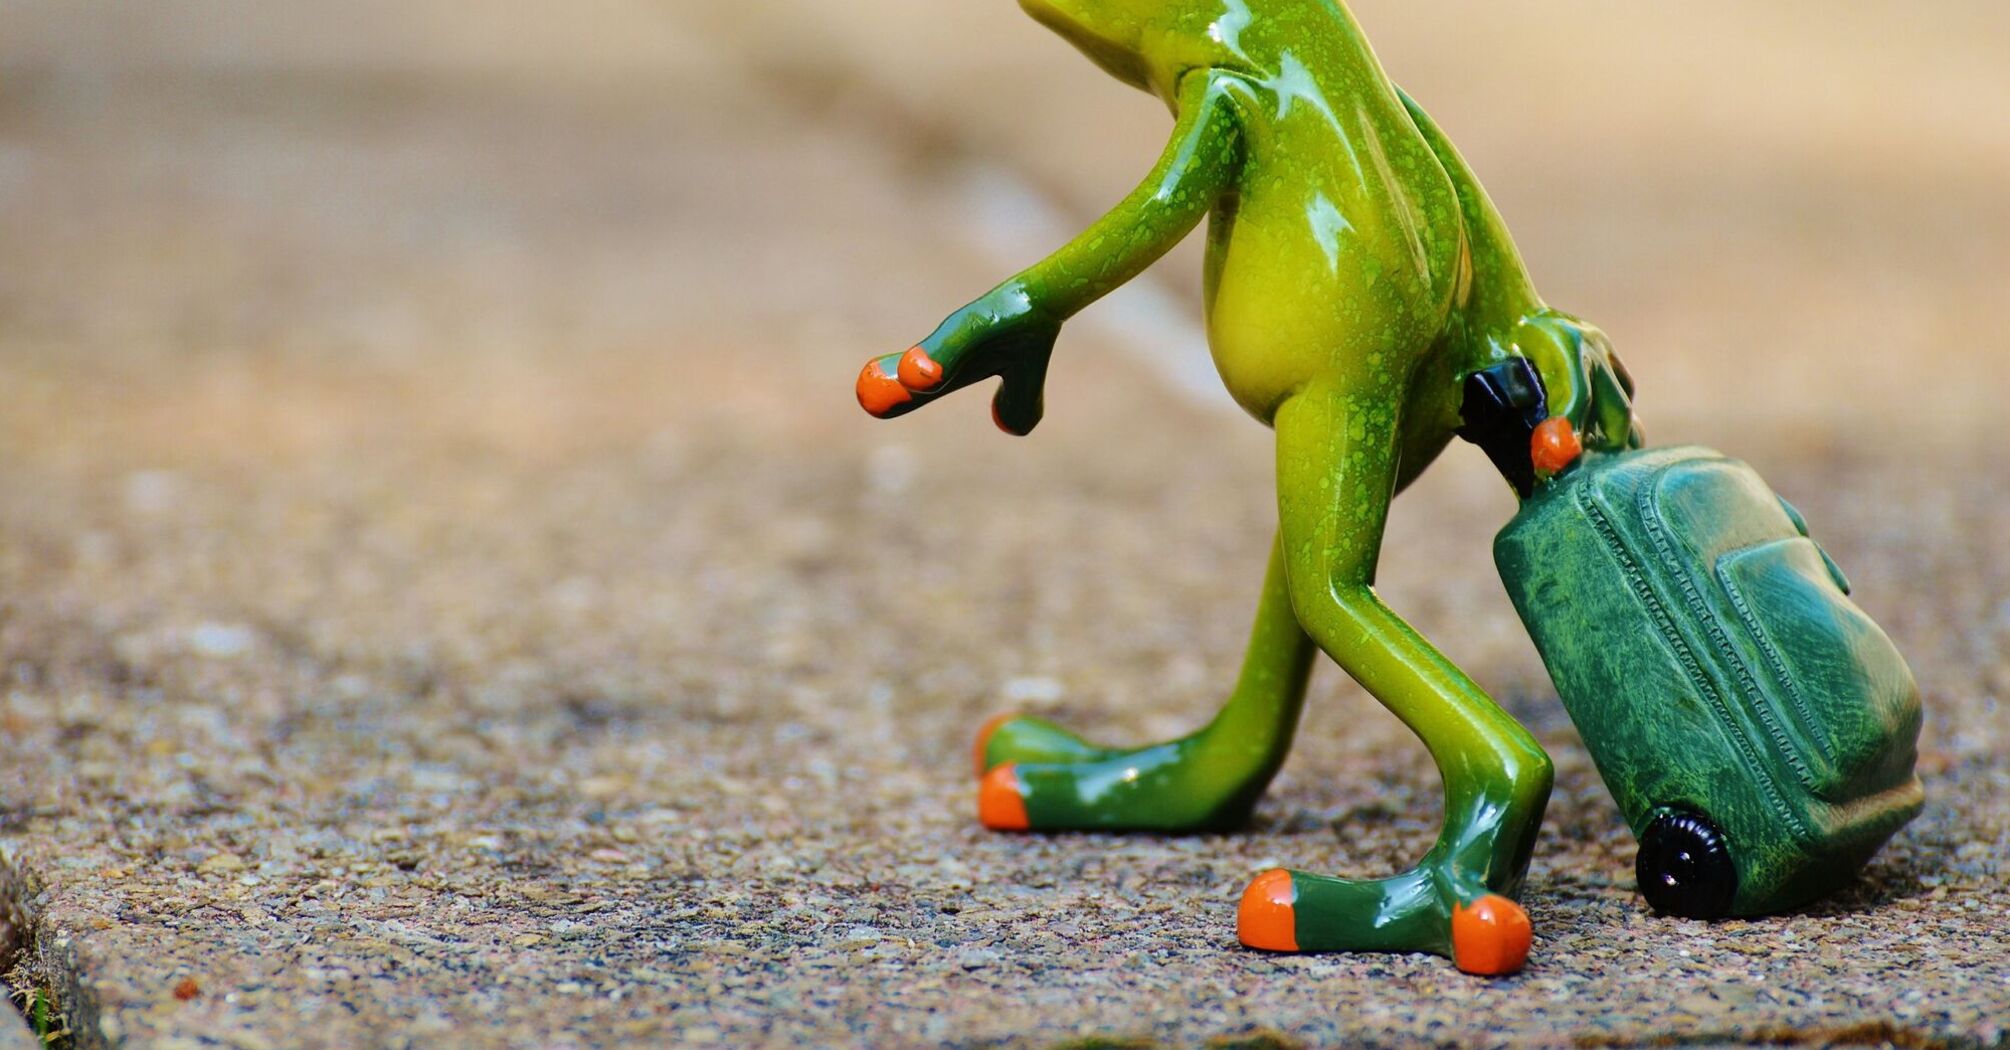 A colorful figurine of a frog standing upright and walking, carrying a green backpack